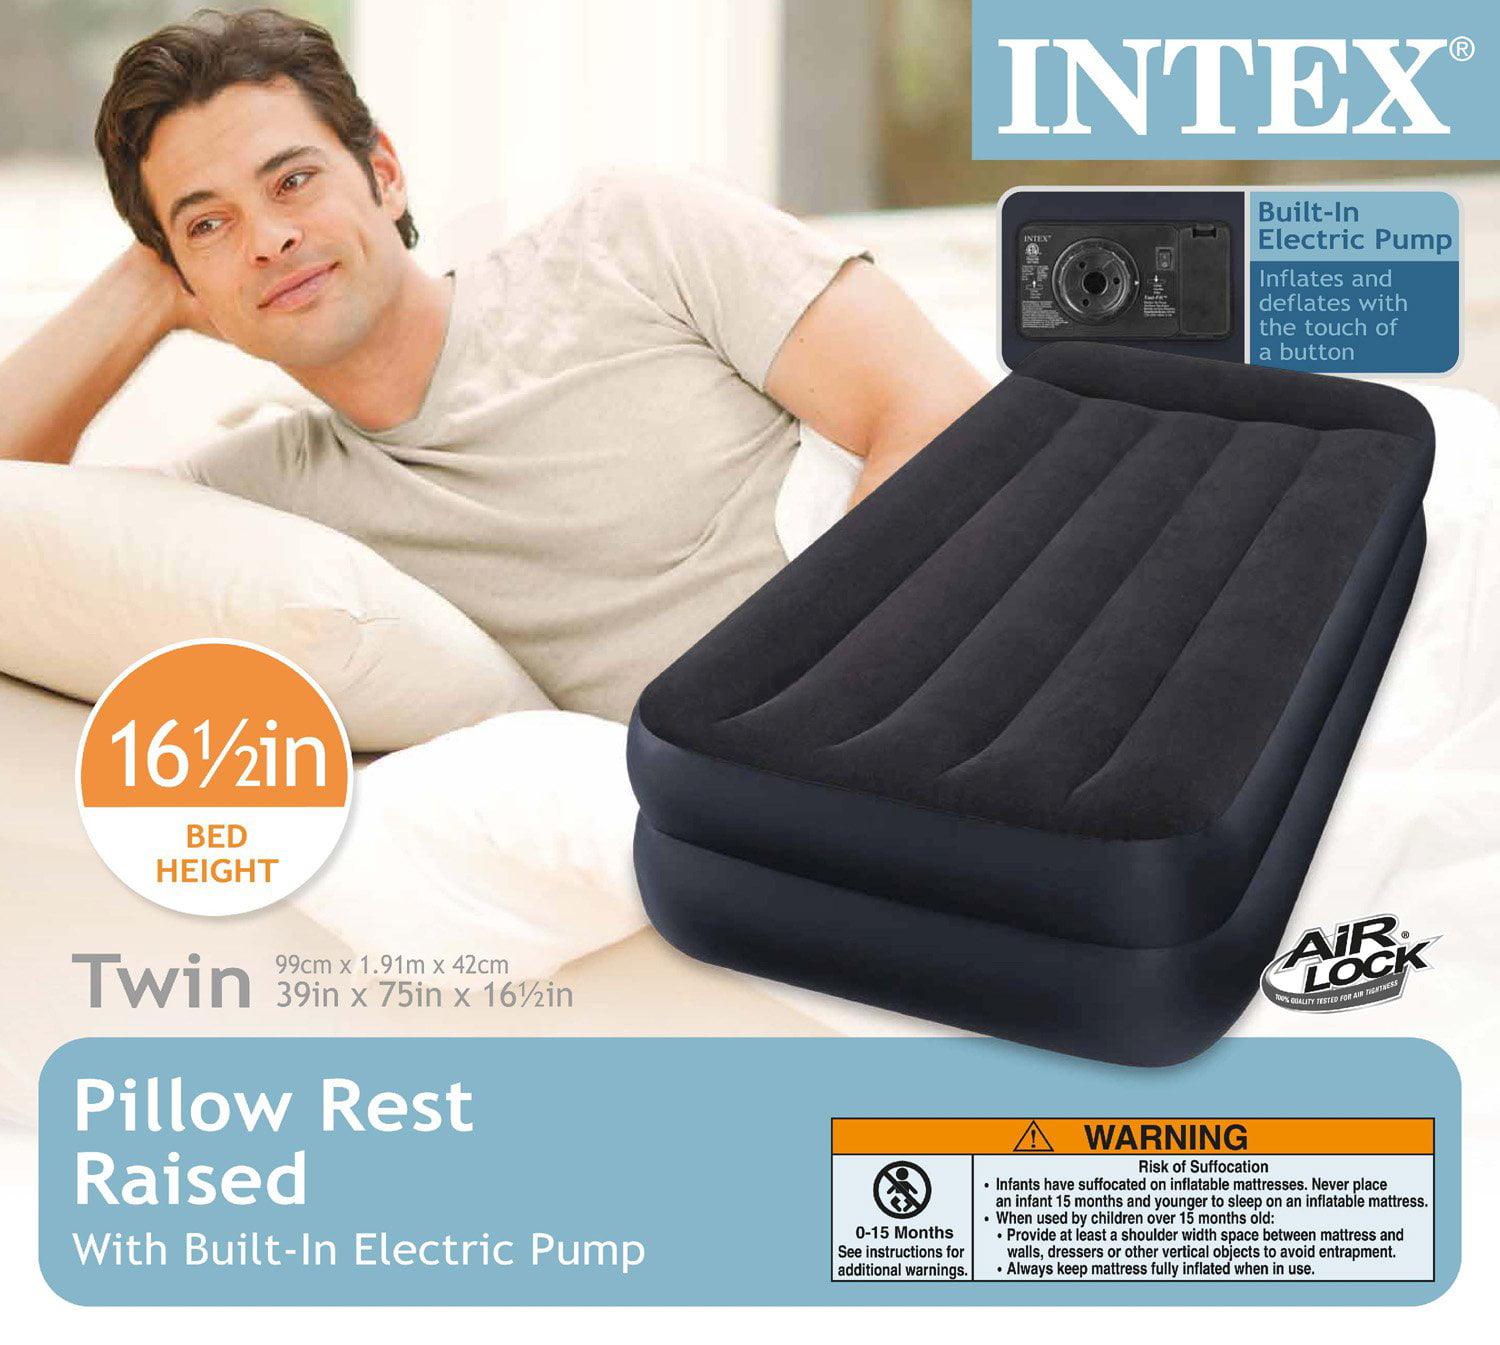 Intex Twin 16 5 Raised Pillow Rest, Intex Twin Pillow Rest Classic Bed With Electric Pump